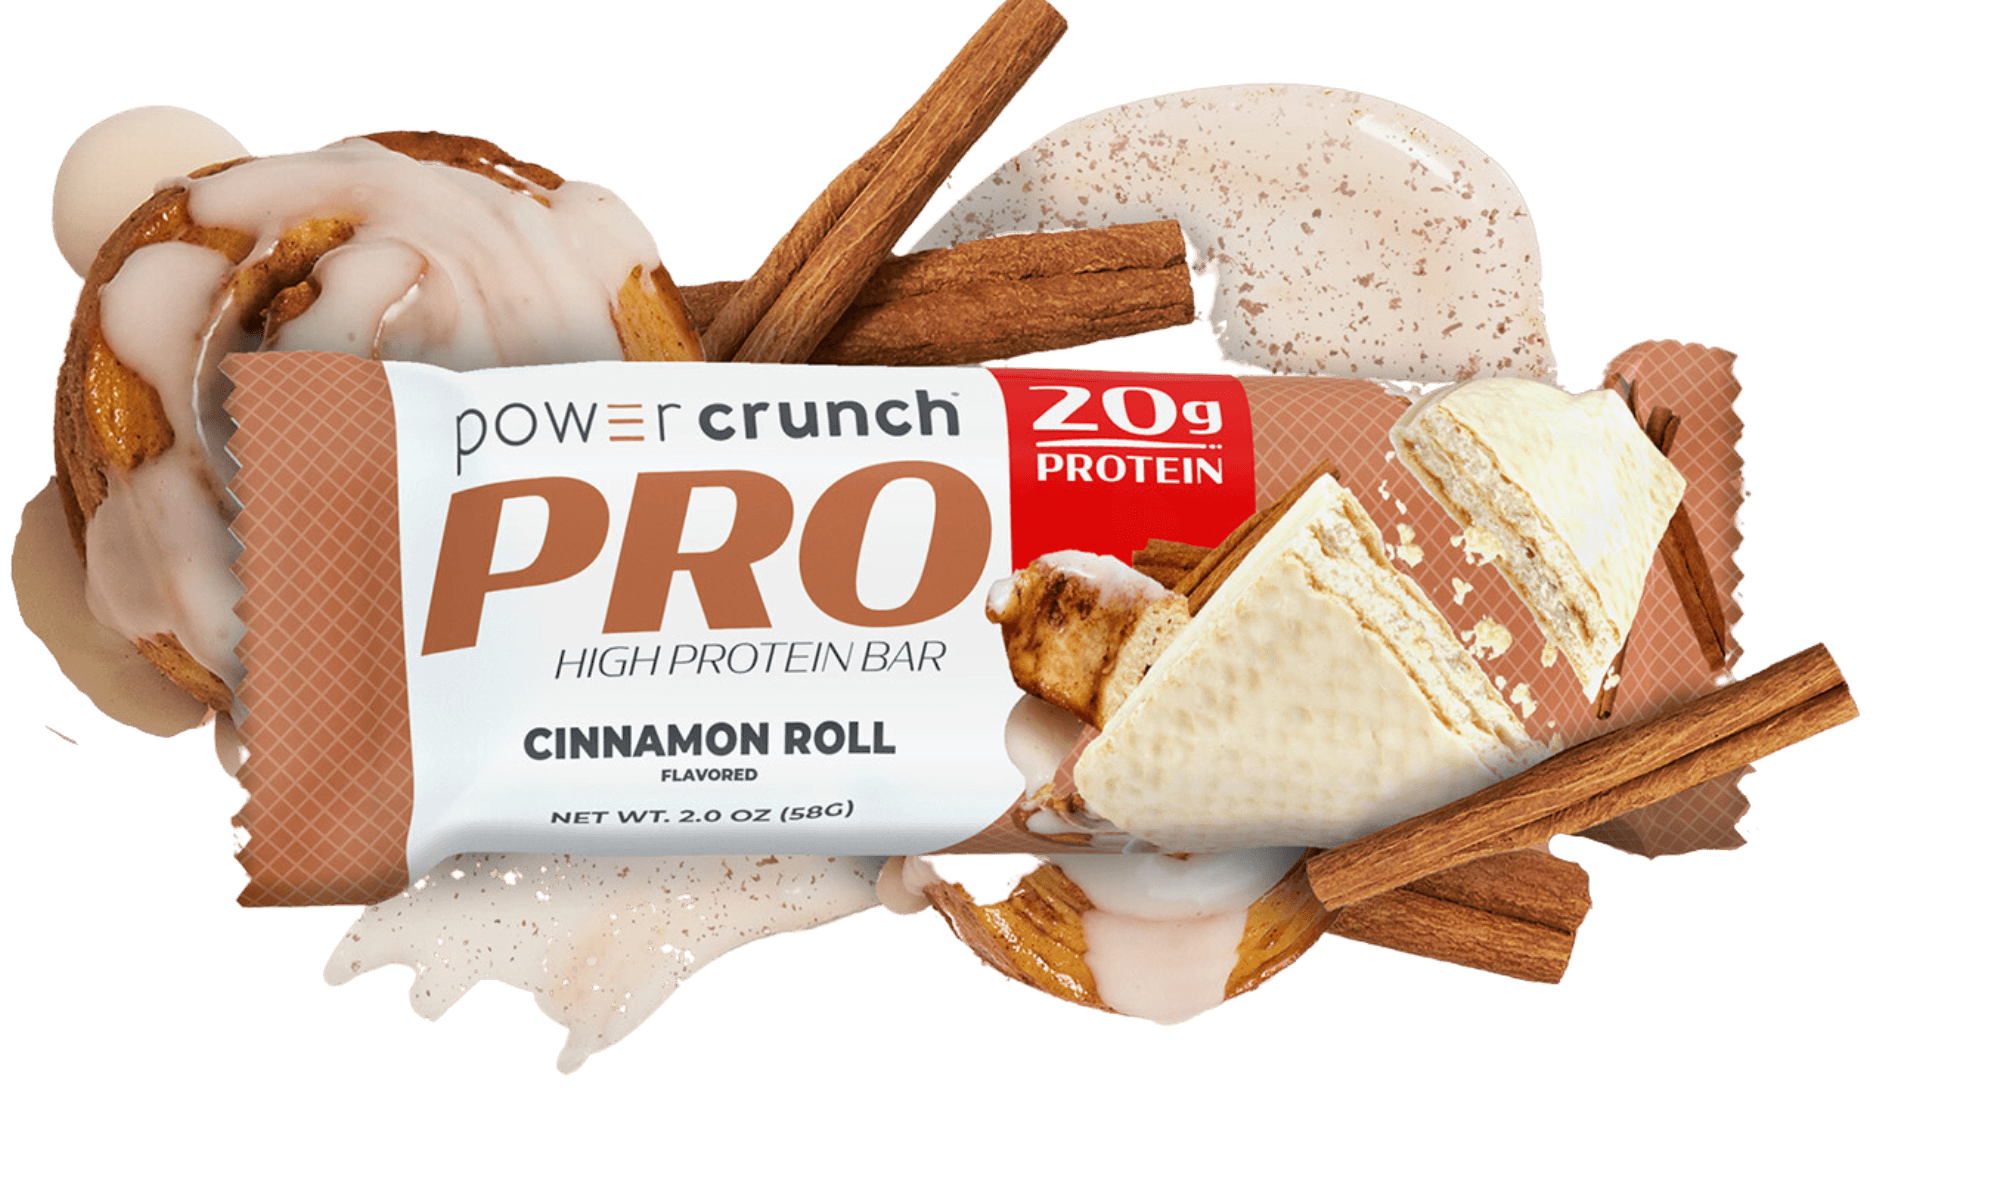 cinnamon roll 20g protein bars pictured with cinnamon flavor explosion